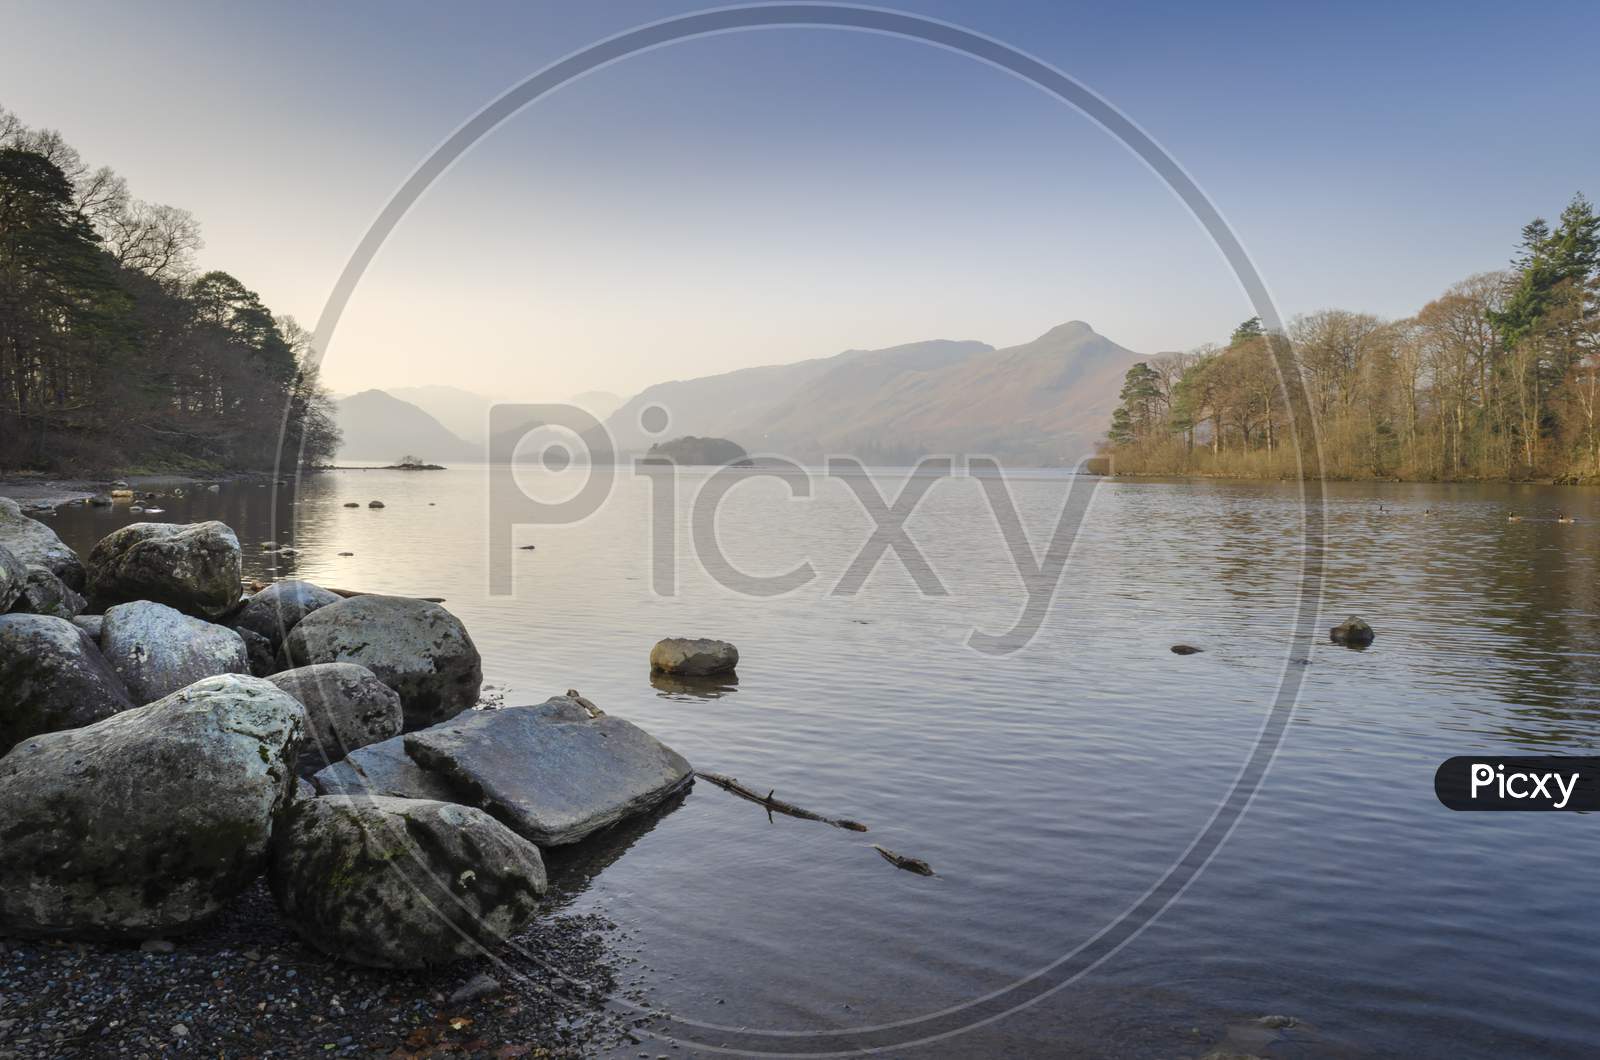 The Early morning still, calm water of Derwent water at Keswick in the Cumbrian Lake District in the North of England.